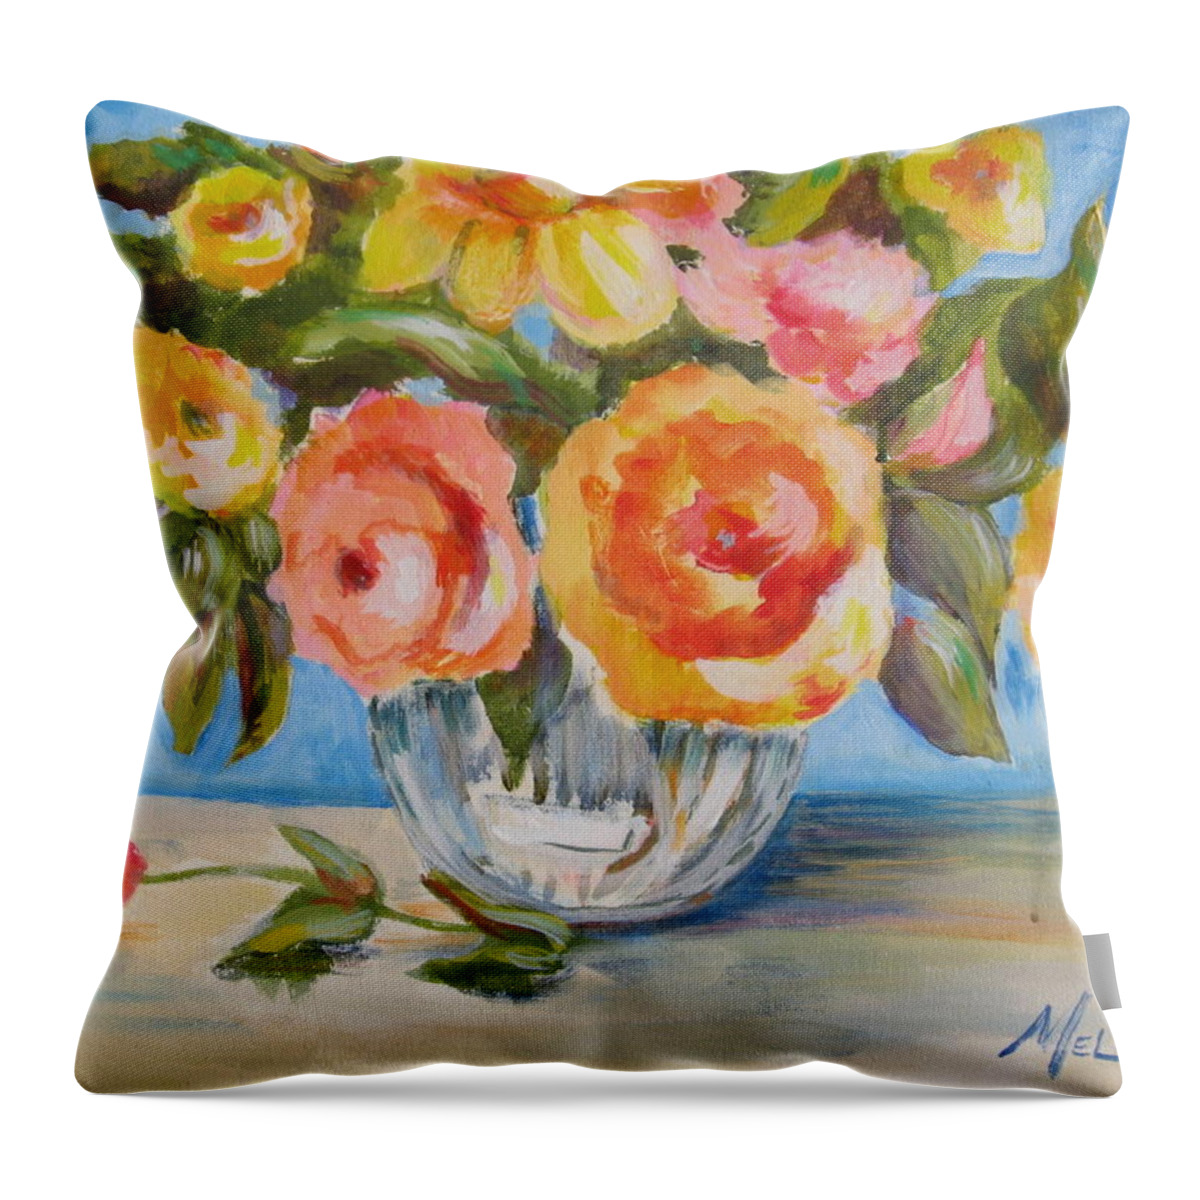 Floral Throw Pillow featuring the painting Fresh Bouquet by Melody Horton Karandjeff